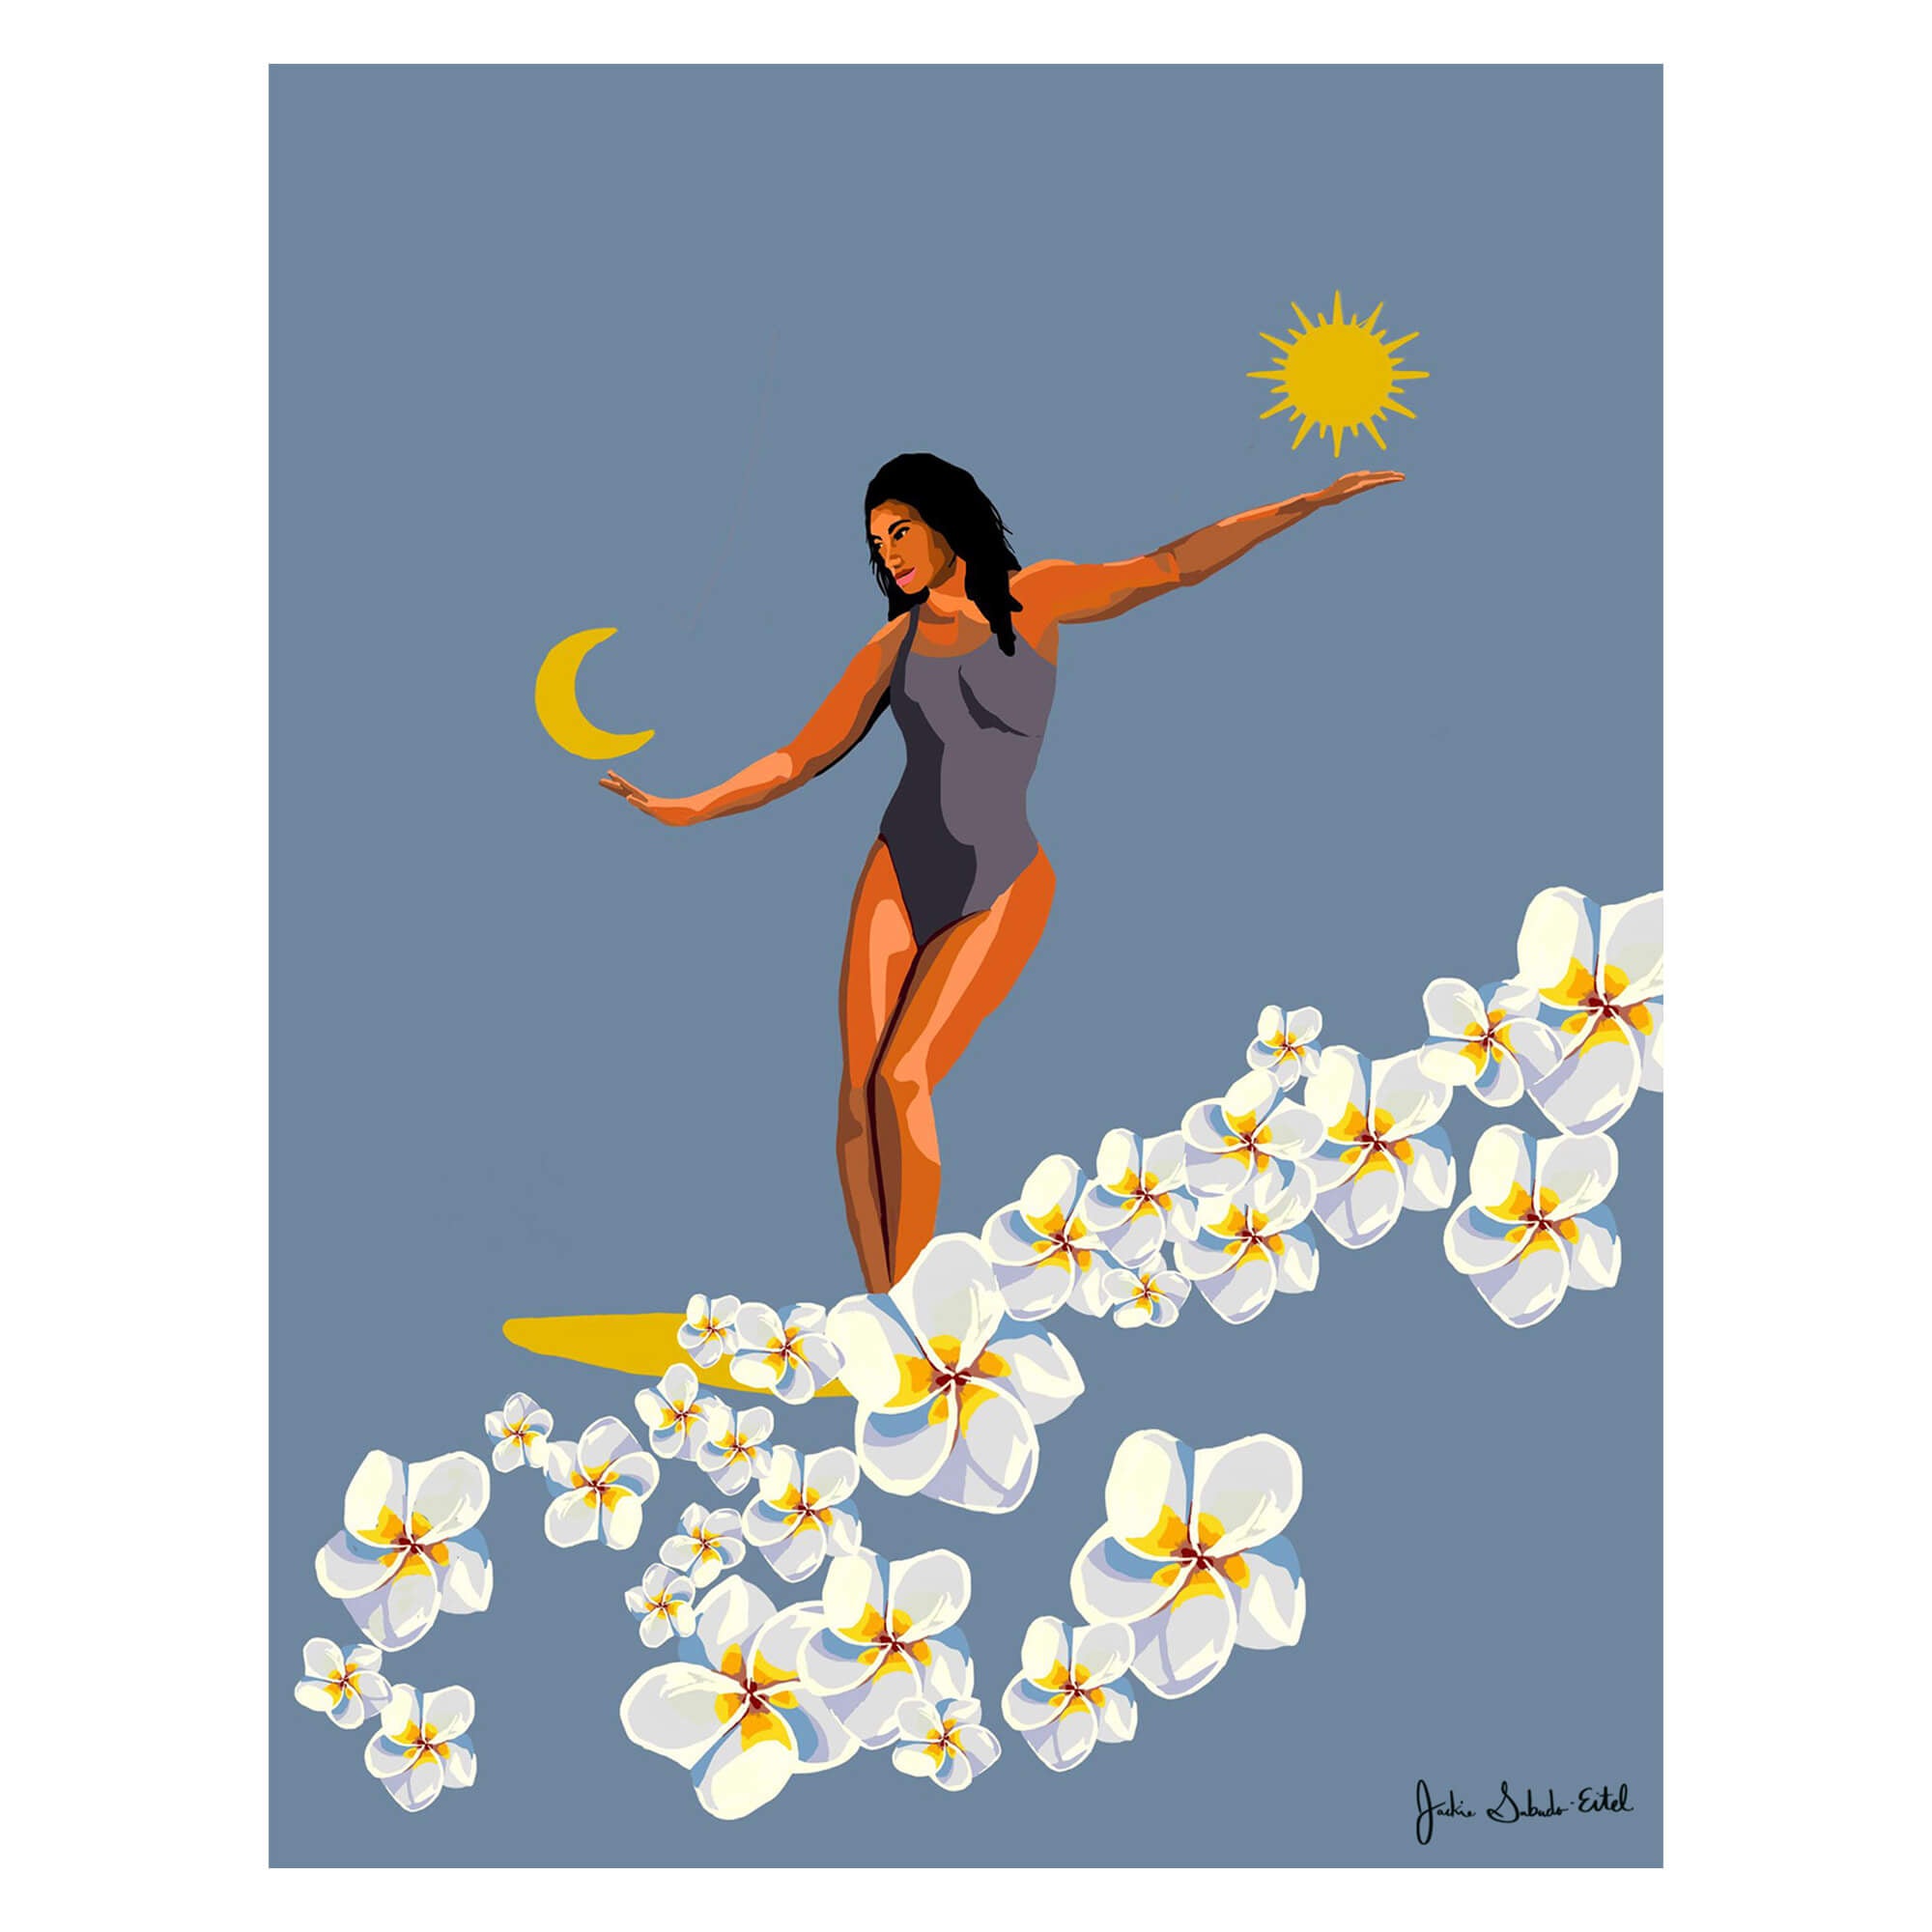 A wood art print of a woman surfing on plumeria flowers with the sun and moon on the background by Hawaii artist Jackie Eitel